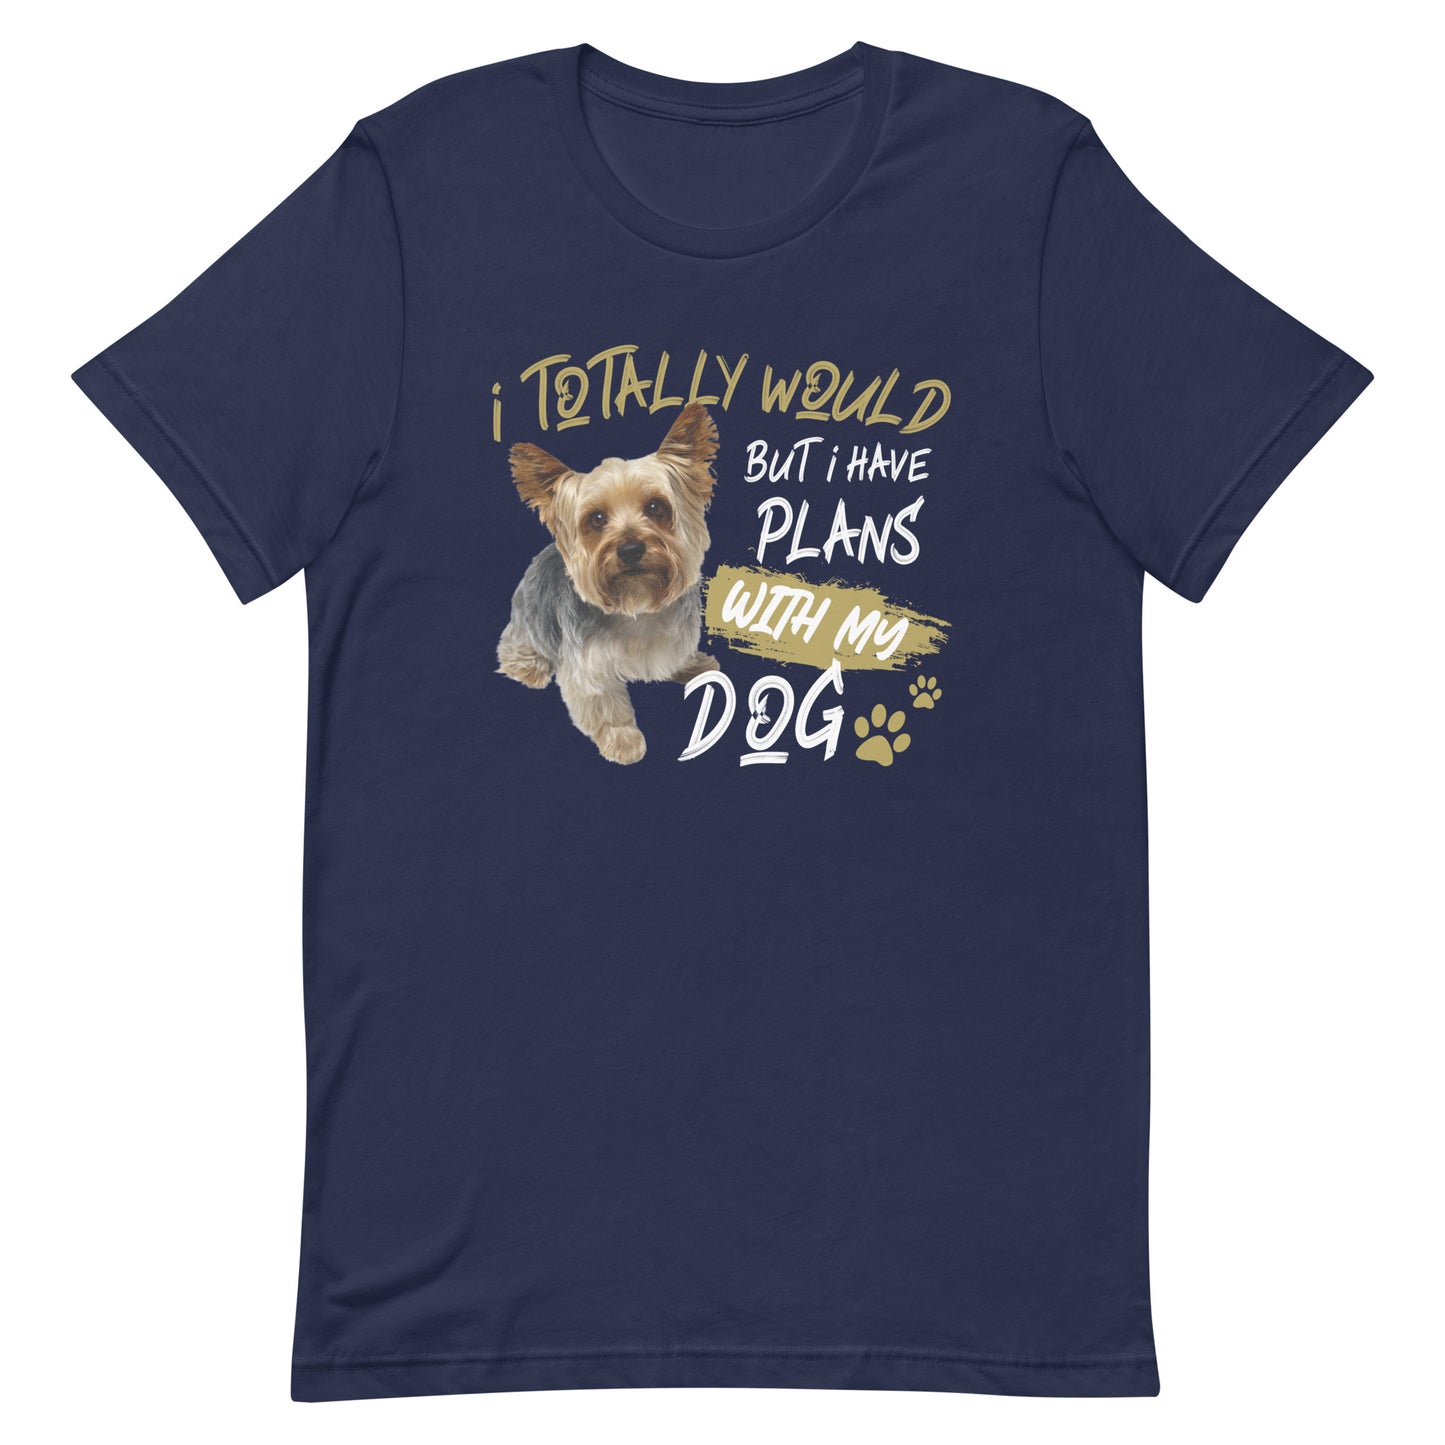 I Totally Would But I Have Plans with My Dog T-Shirt